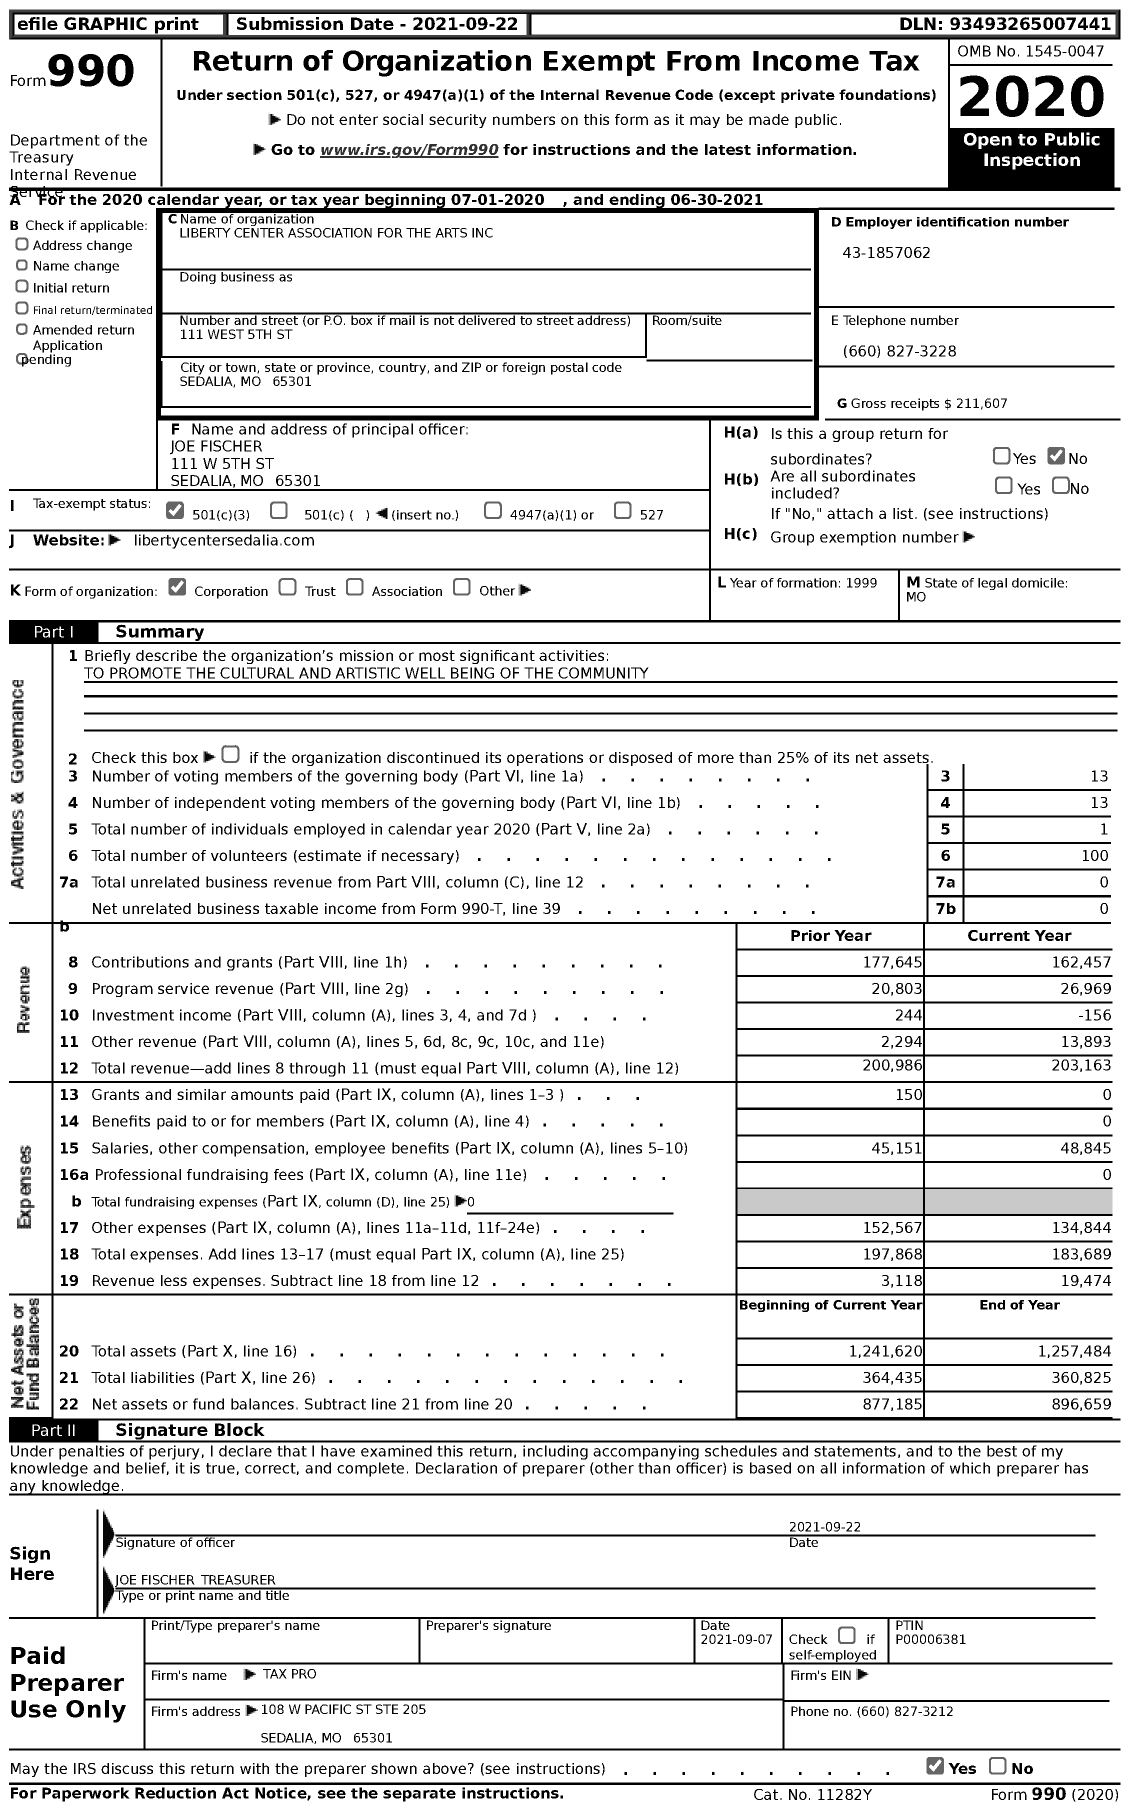 Image of first page of 2020 Form 990 for Liberty Center Association for the Arts